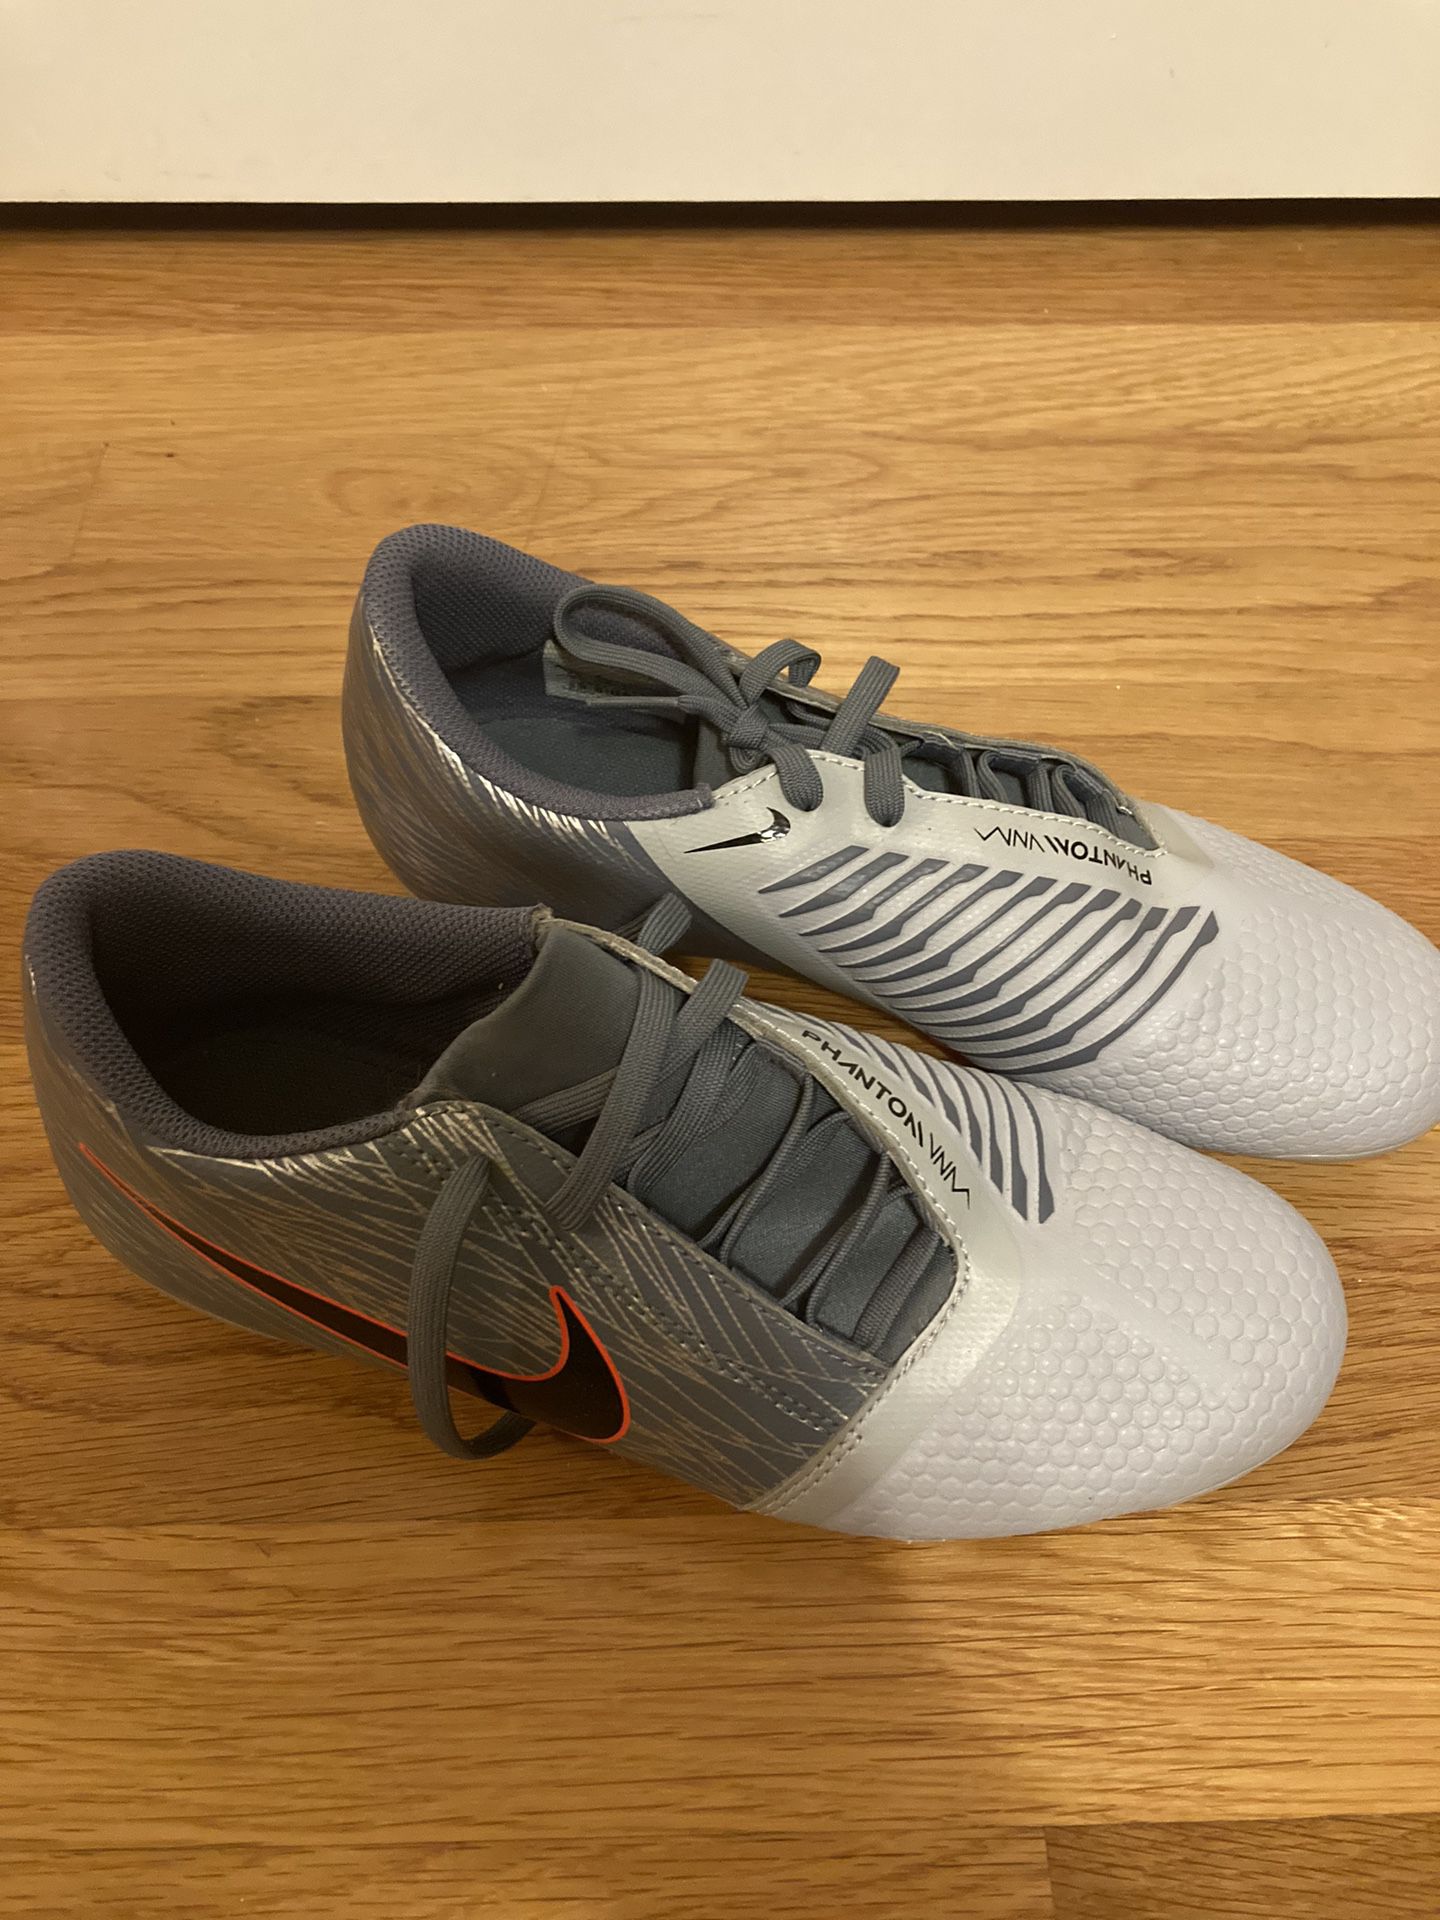 Nike Soccer Cleats (shoes)